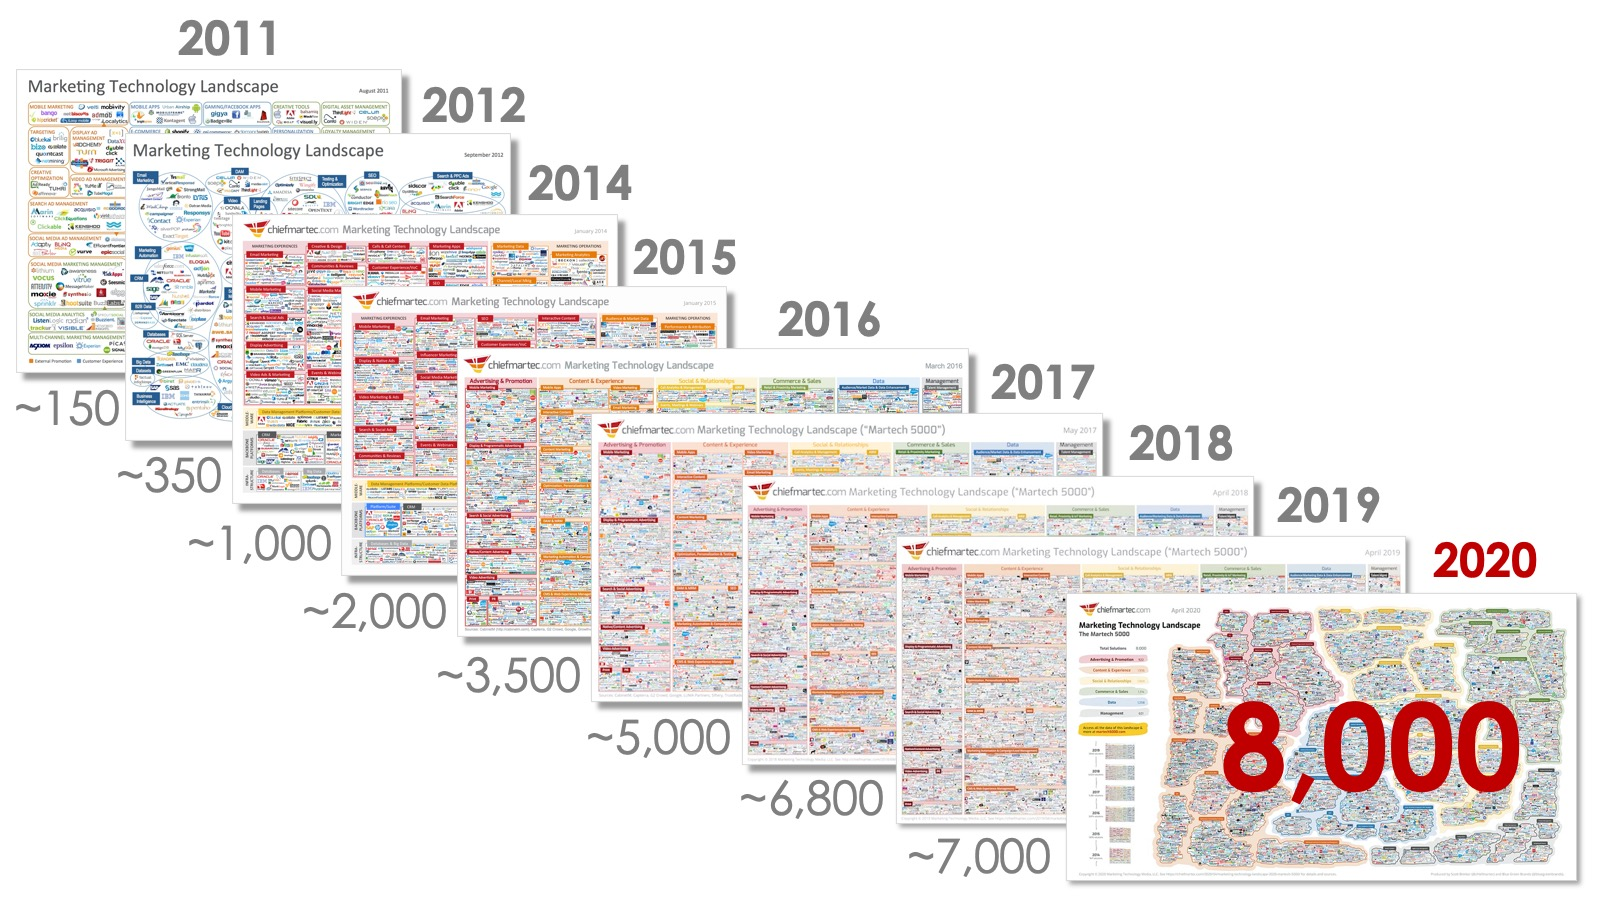 Martech over the years